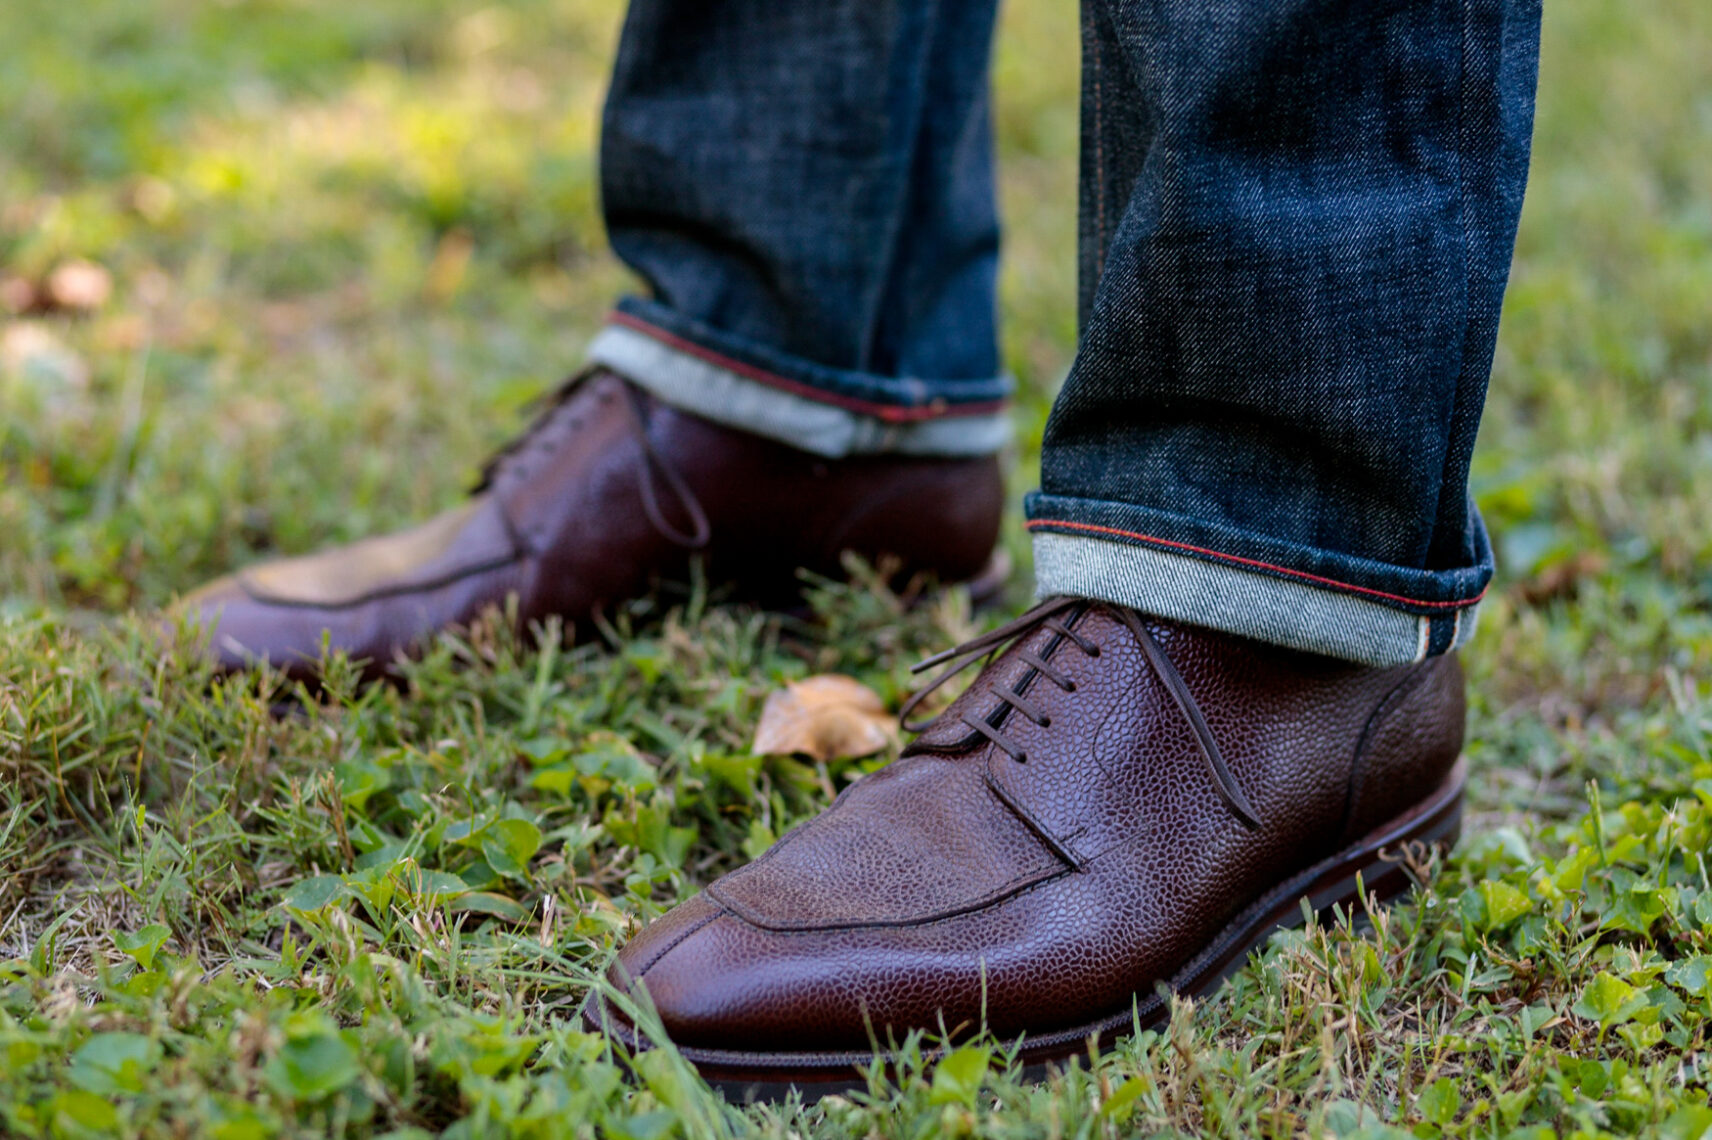 Recommended—Cobbler Union Shoes [A Brief Review] – Menswear Musings